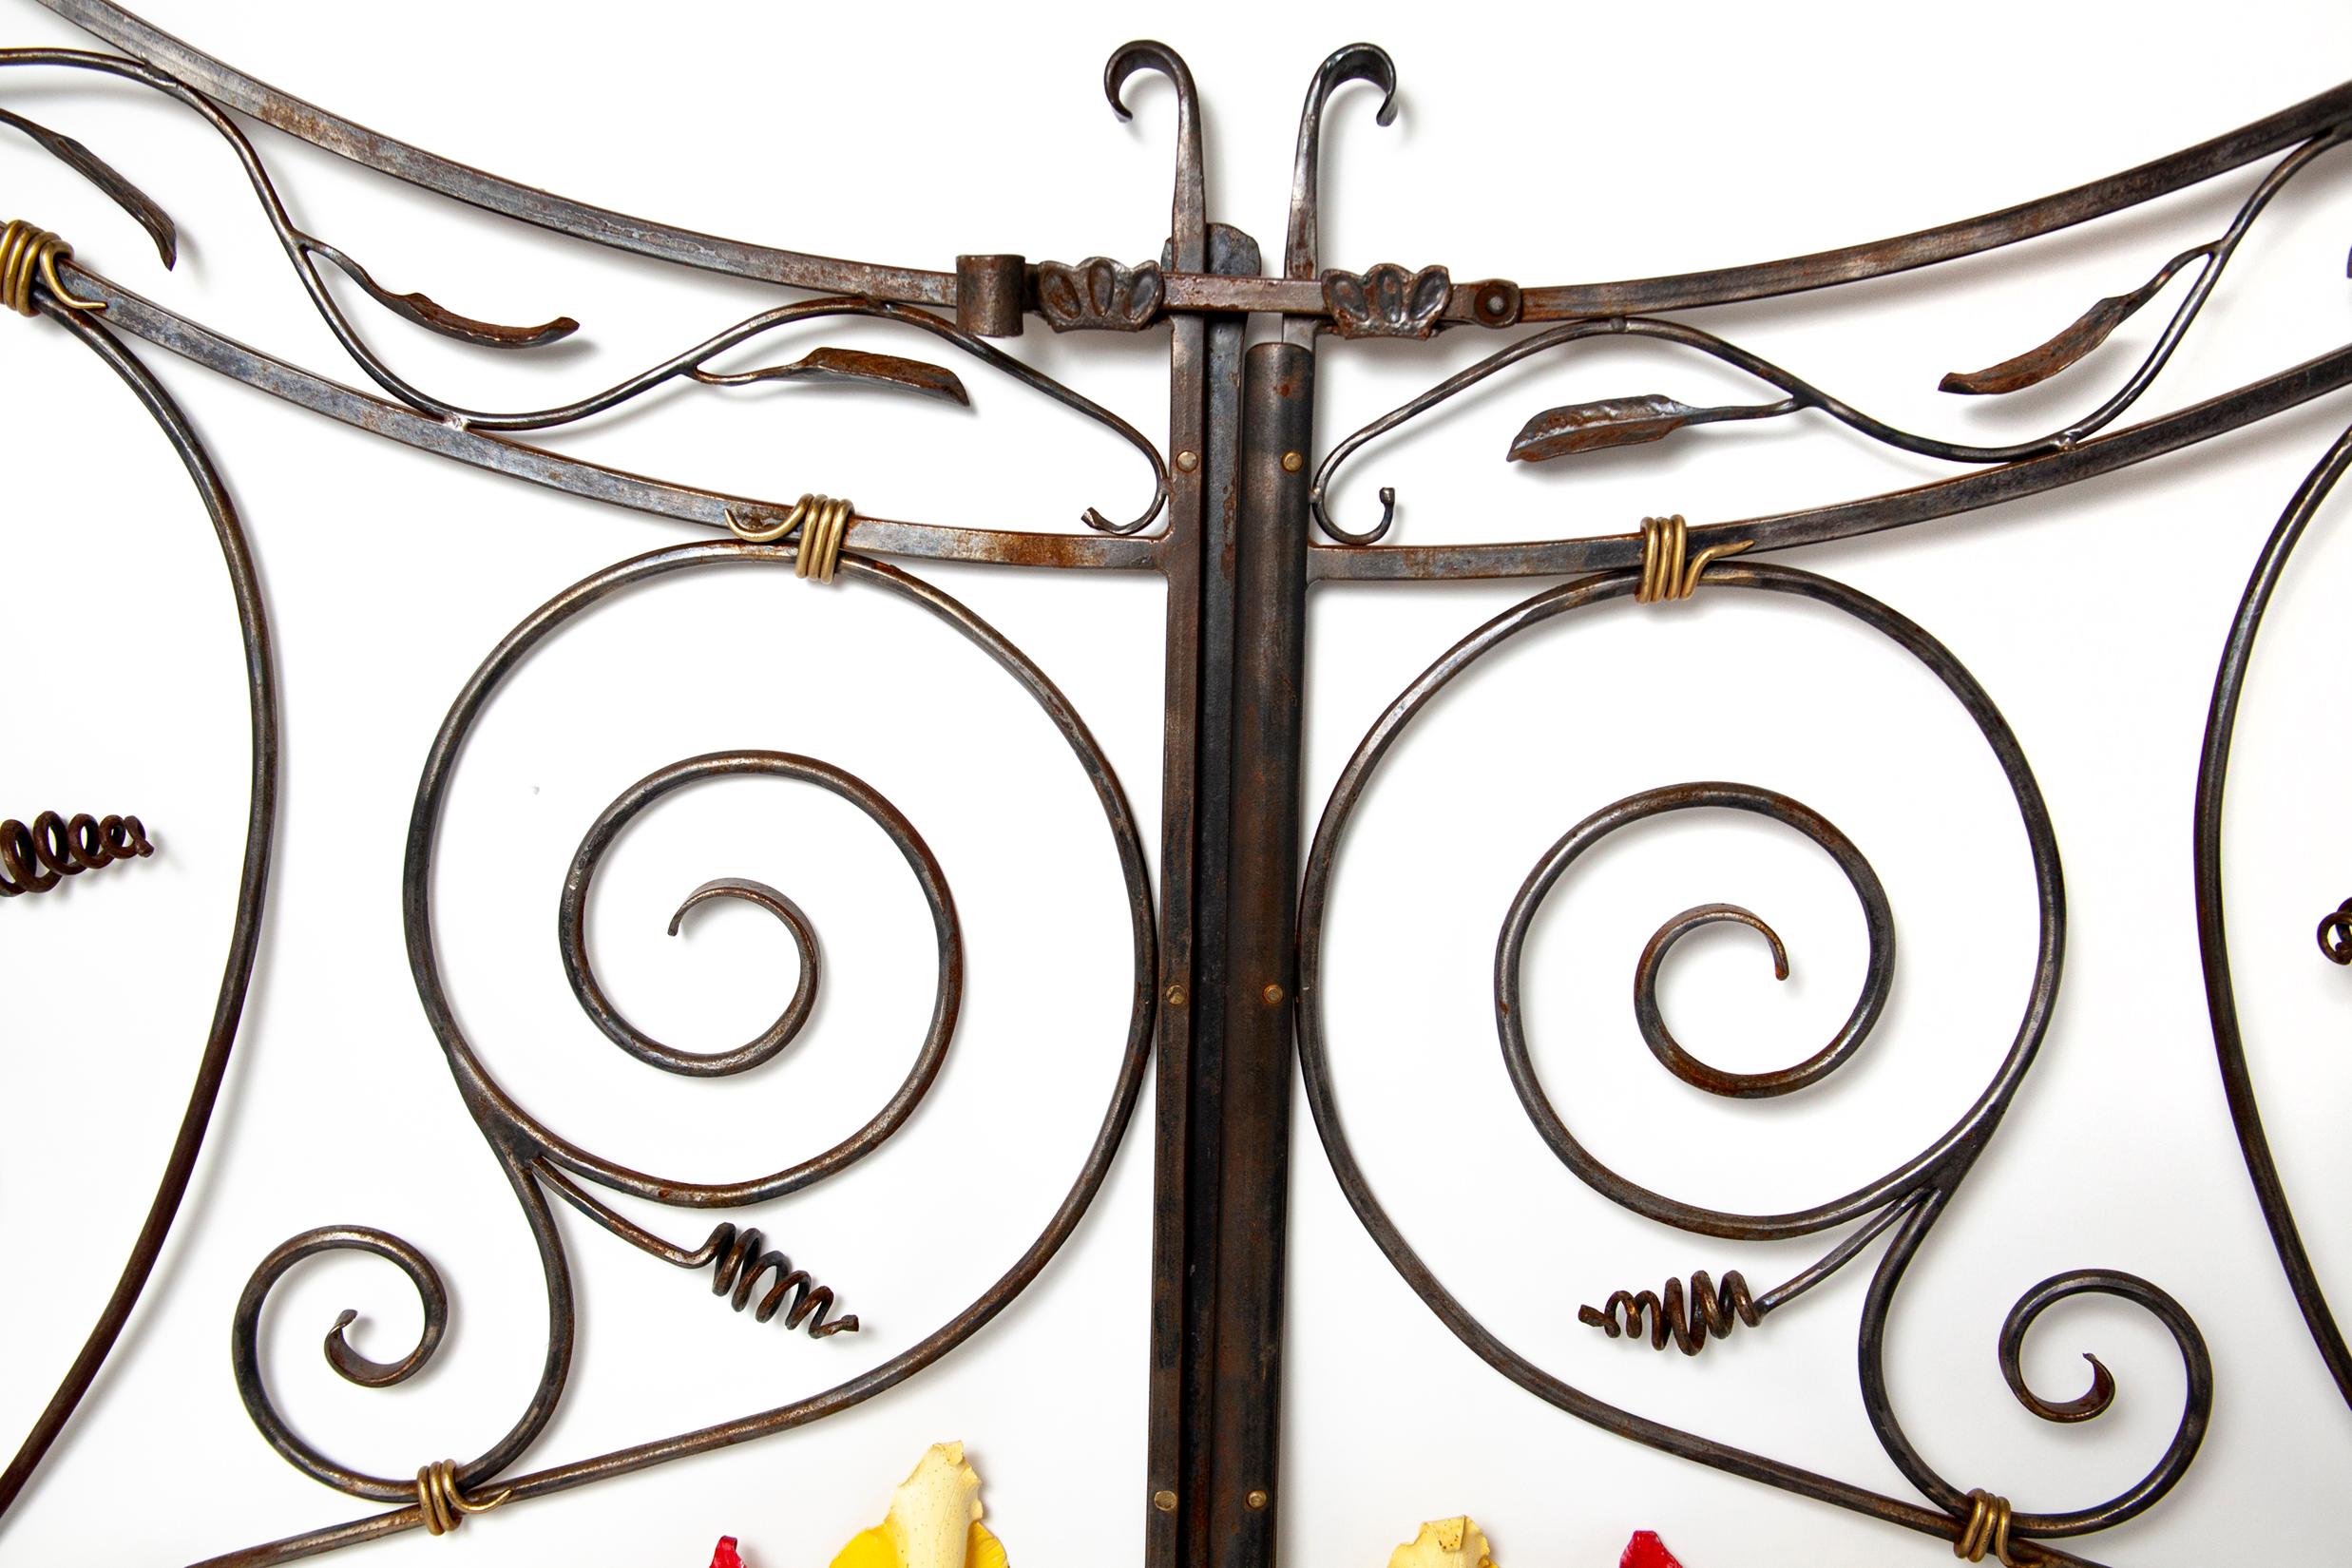 American Handwrought 2-Piece Garden Gate Made in Orleans, Ma